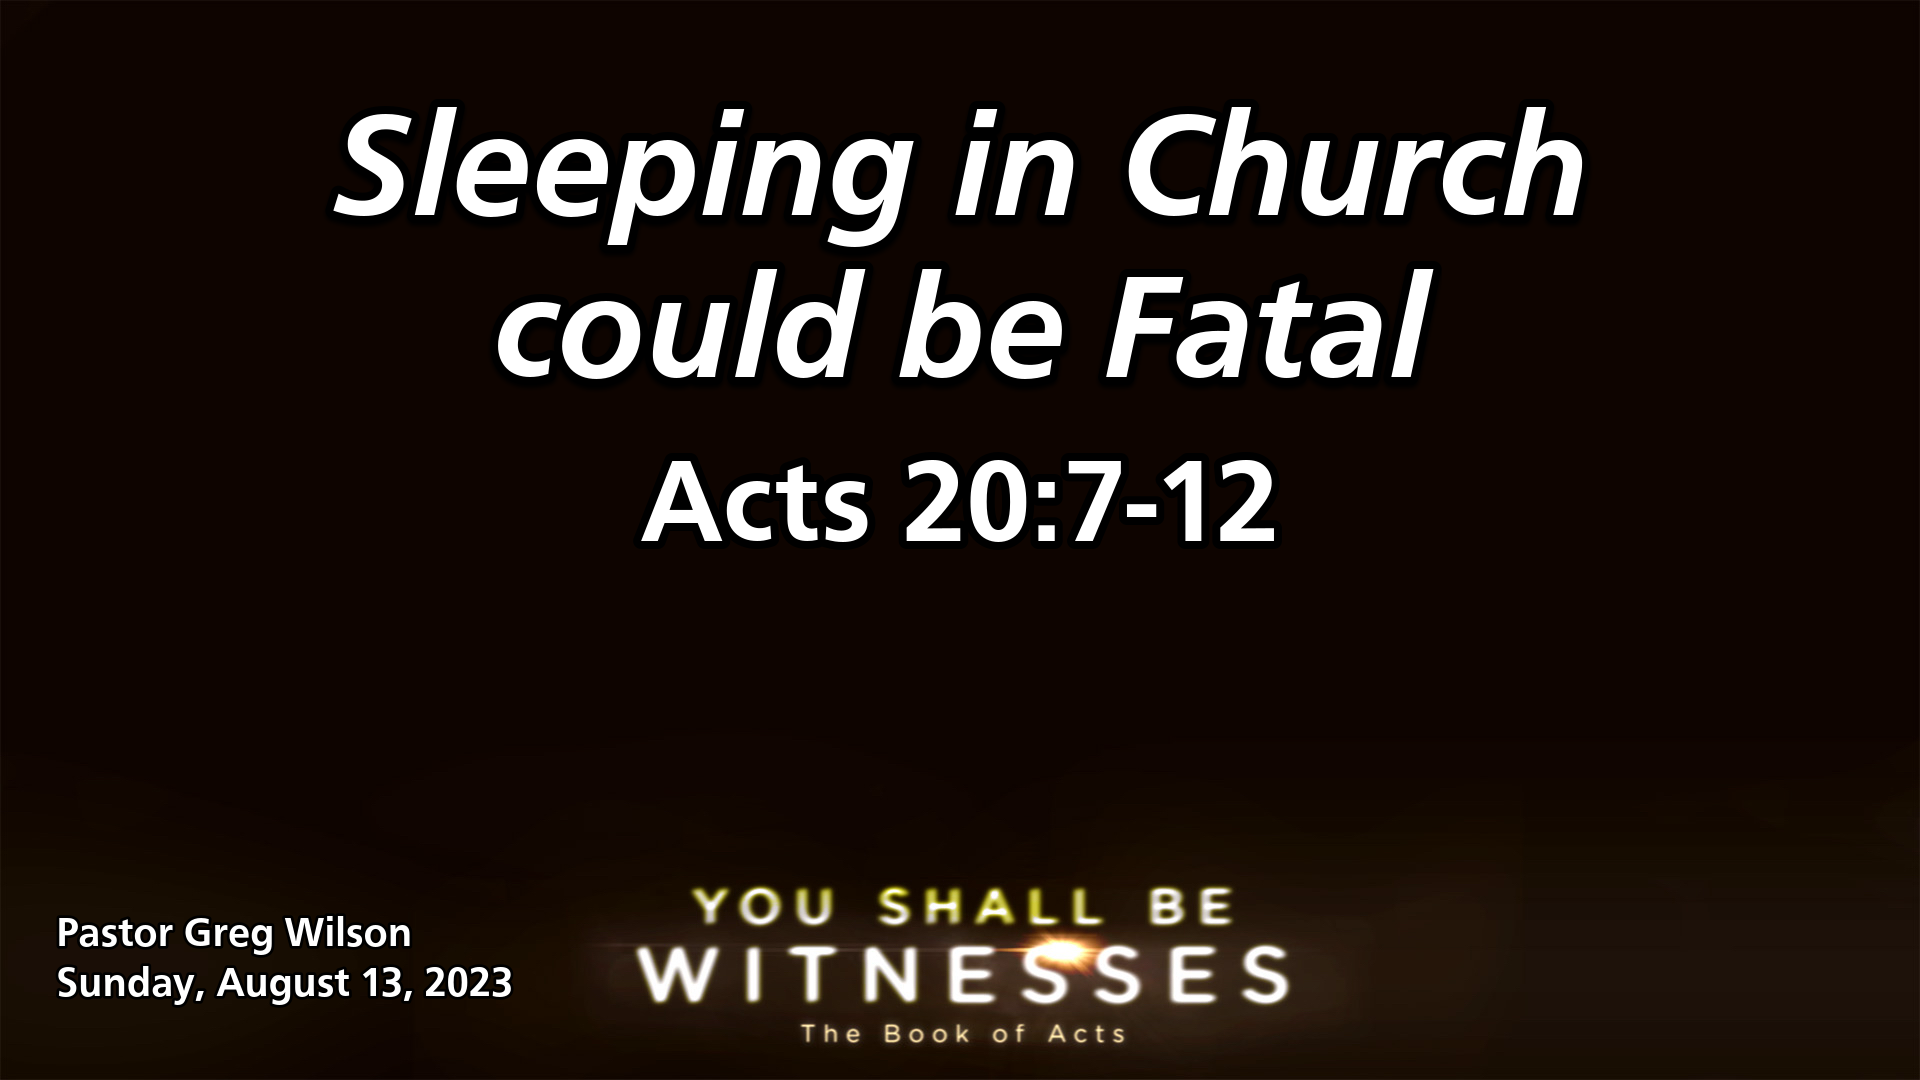 "Sleeping in Church could be Fatal"